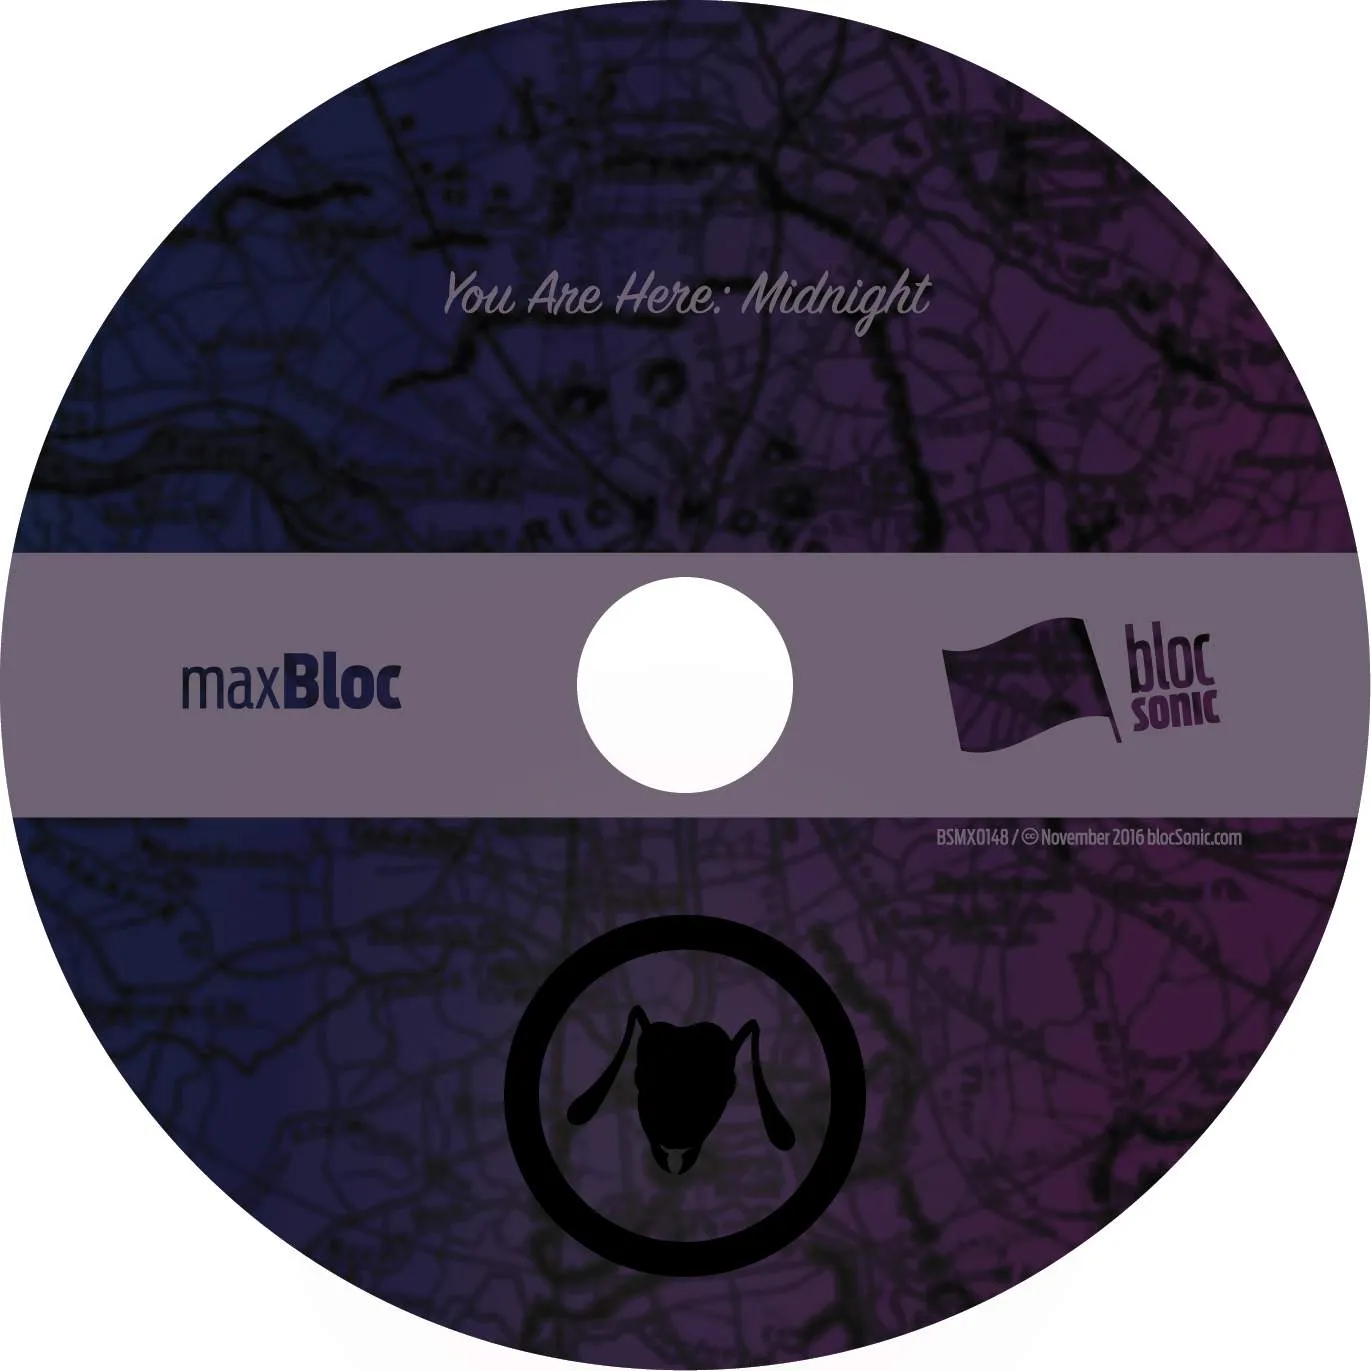 Album disc for “You Are Here: Midnight” by Ant The Symbol